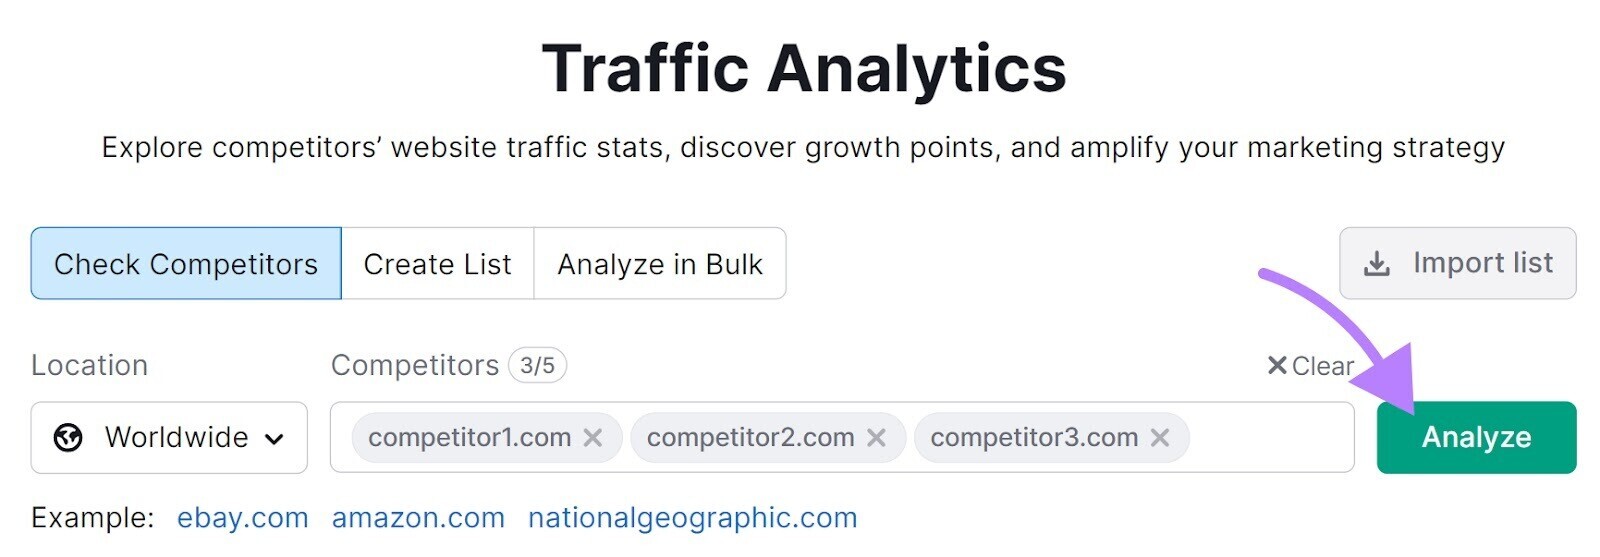 search for your competitors in Traffic Analytics tool